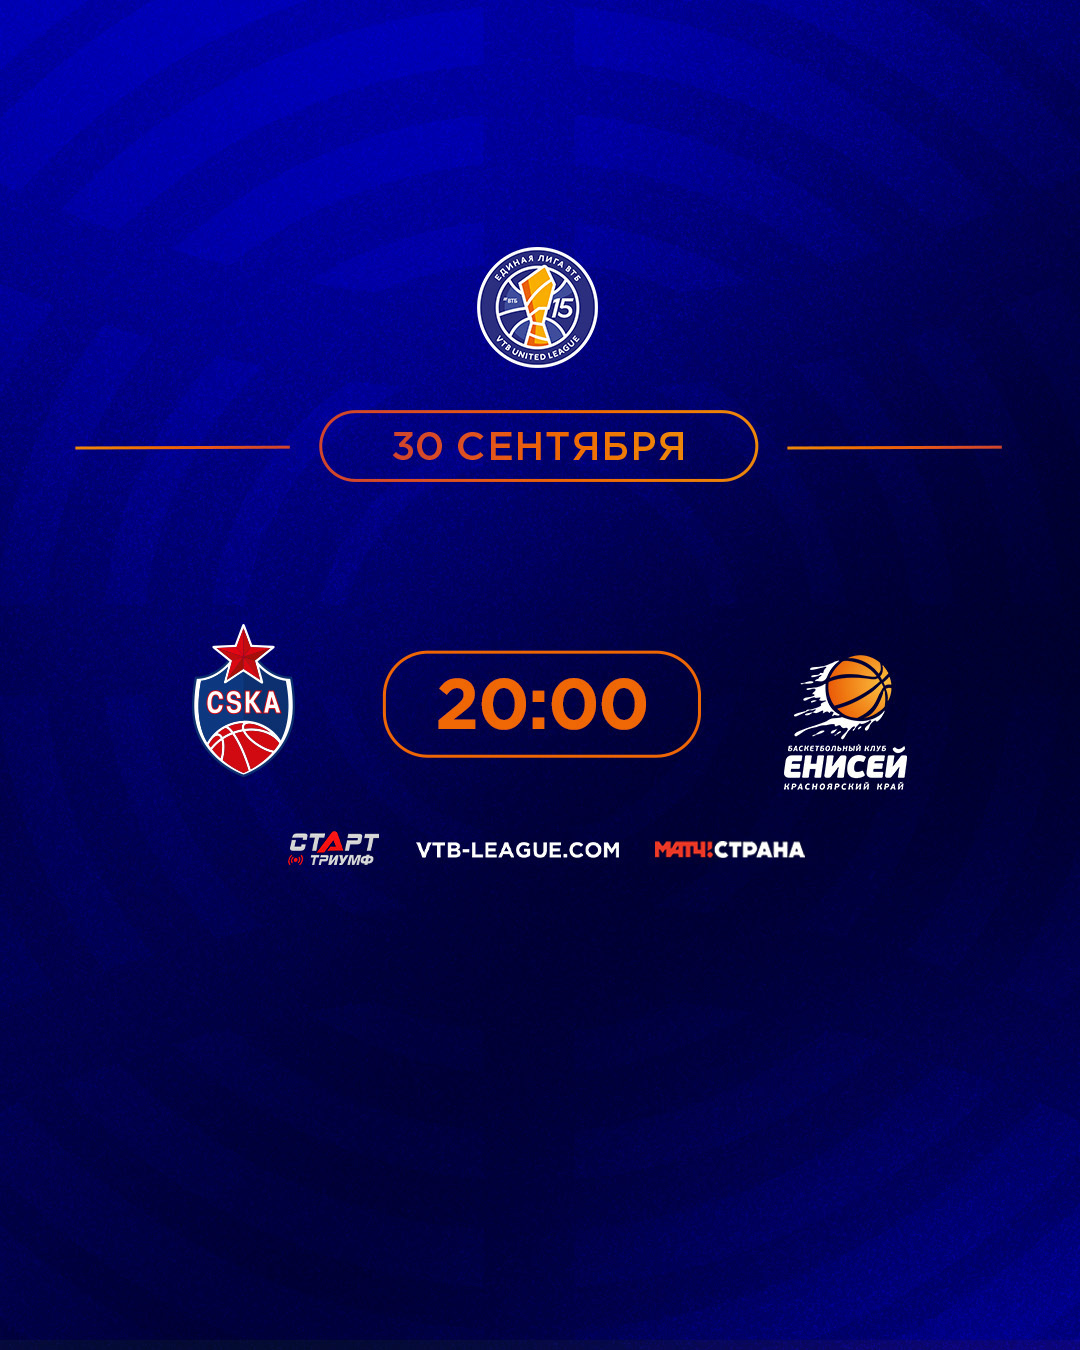 Fenerbahce Beko and Besiktas are the SuperCup 2023 participants